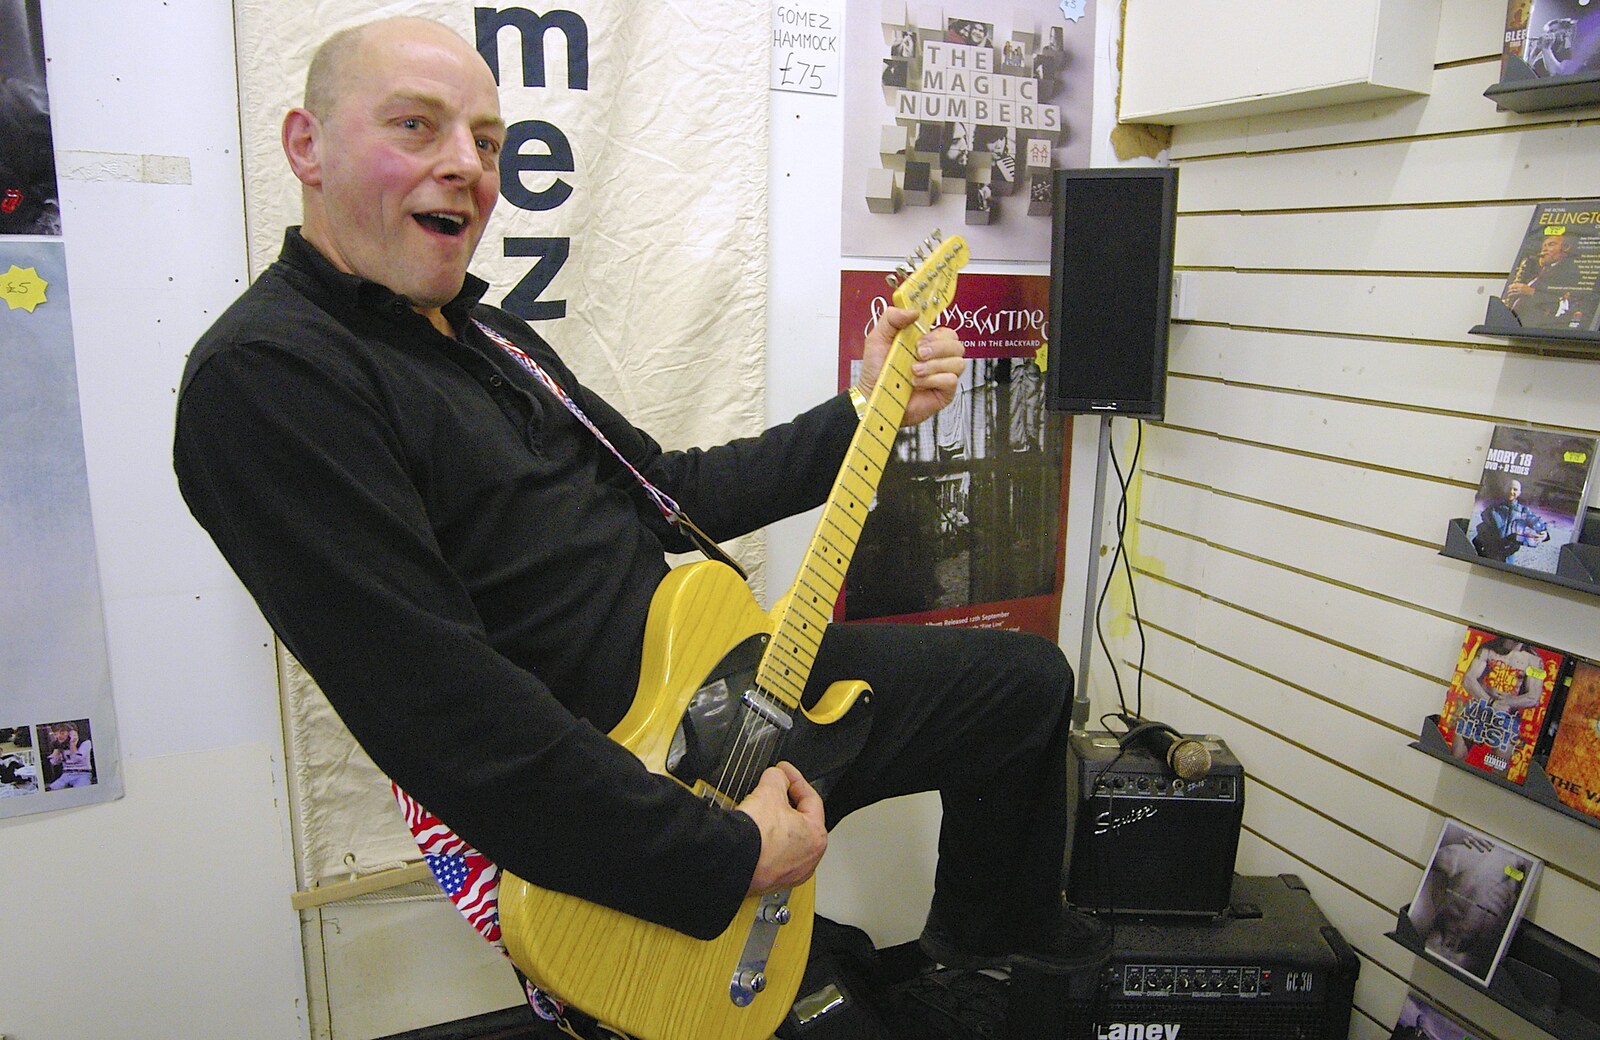 Closing Down: Viva La Revolution Records, Diss, Norfolk - 21st January 2006: Wes pretends to play Bruce Springsteen's Fender